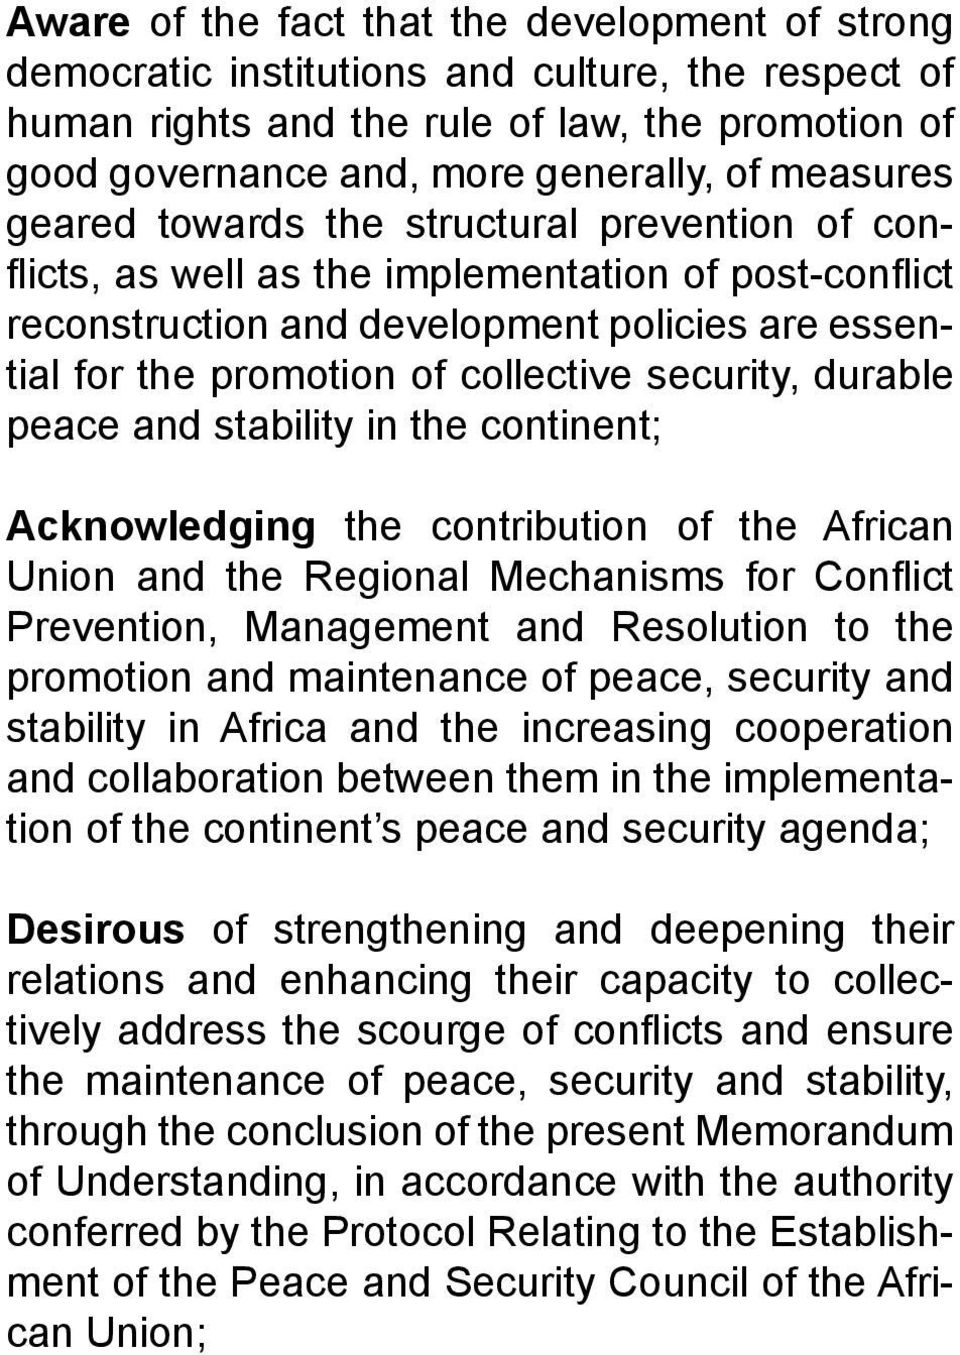 security, durable peace and stability in the continent; Acknowledging the contribution of the African Union and the Regional Mechanisms for Conflict Prevention, Management and Resolution to the